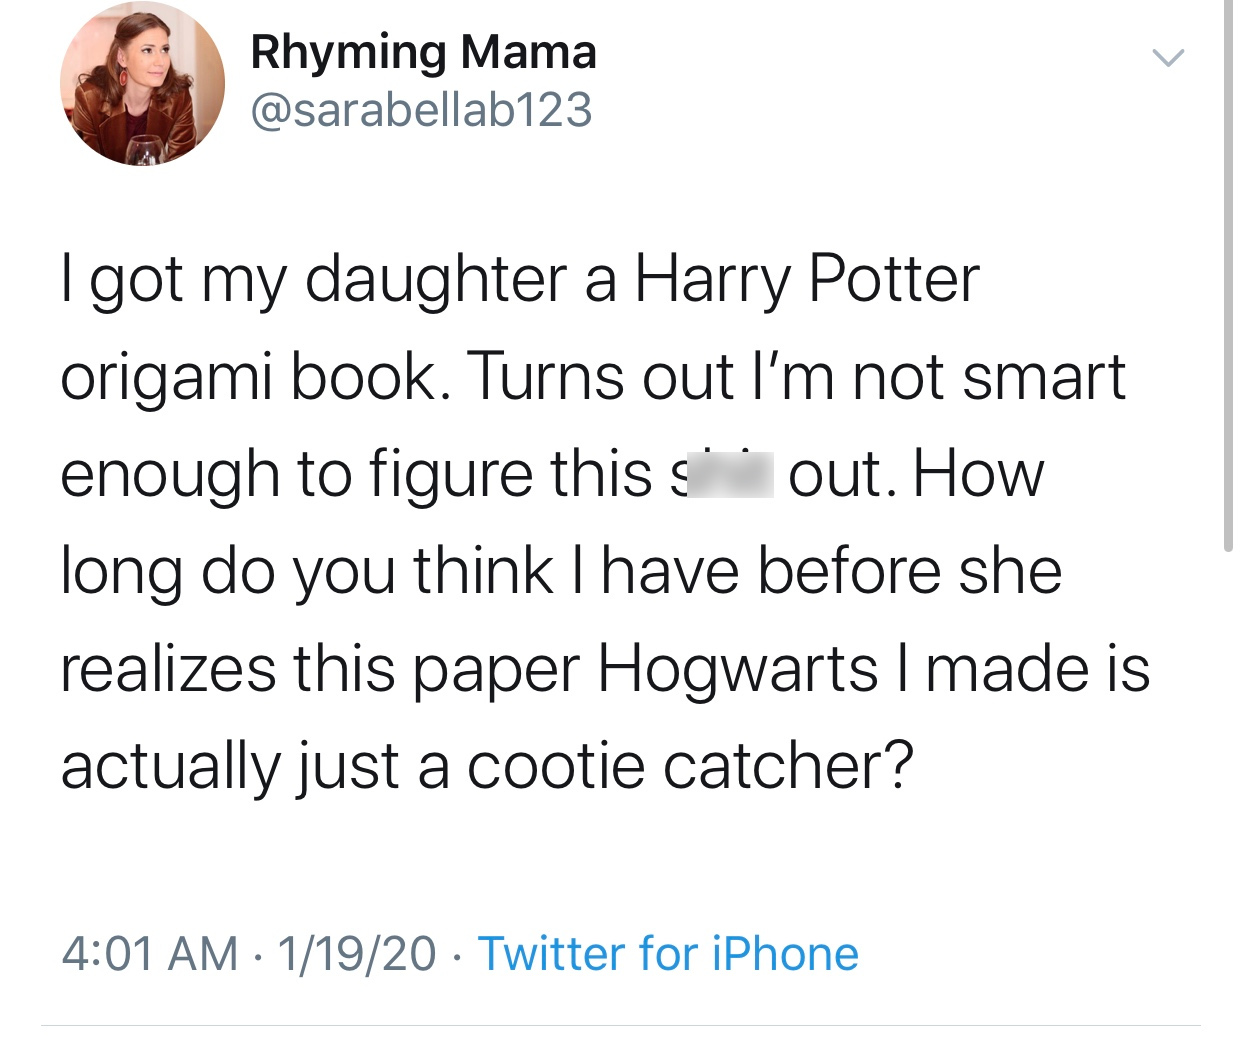 angle - Rhyming Mama I got my daughter a Harry Potter origami book. Turns out I'm not smart enough to figure this out. How long do you think I have before she realizes this paper Hogwarts I made is actually just a cootie catcher? 11920 Twitter for iPhone